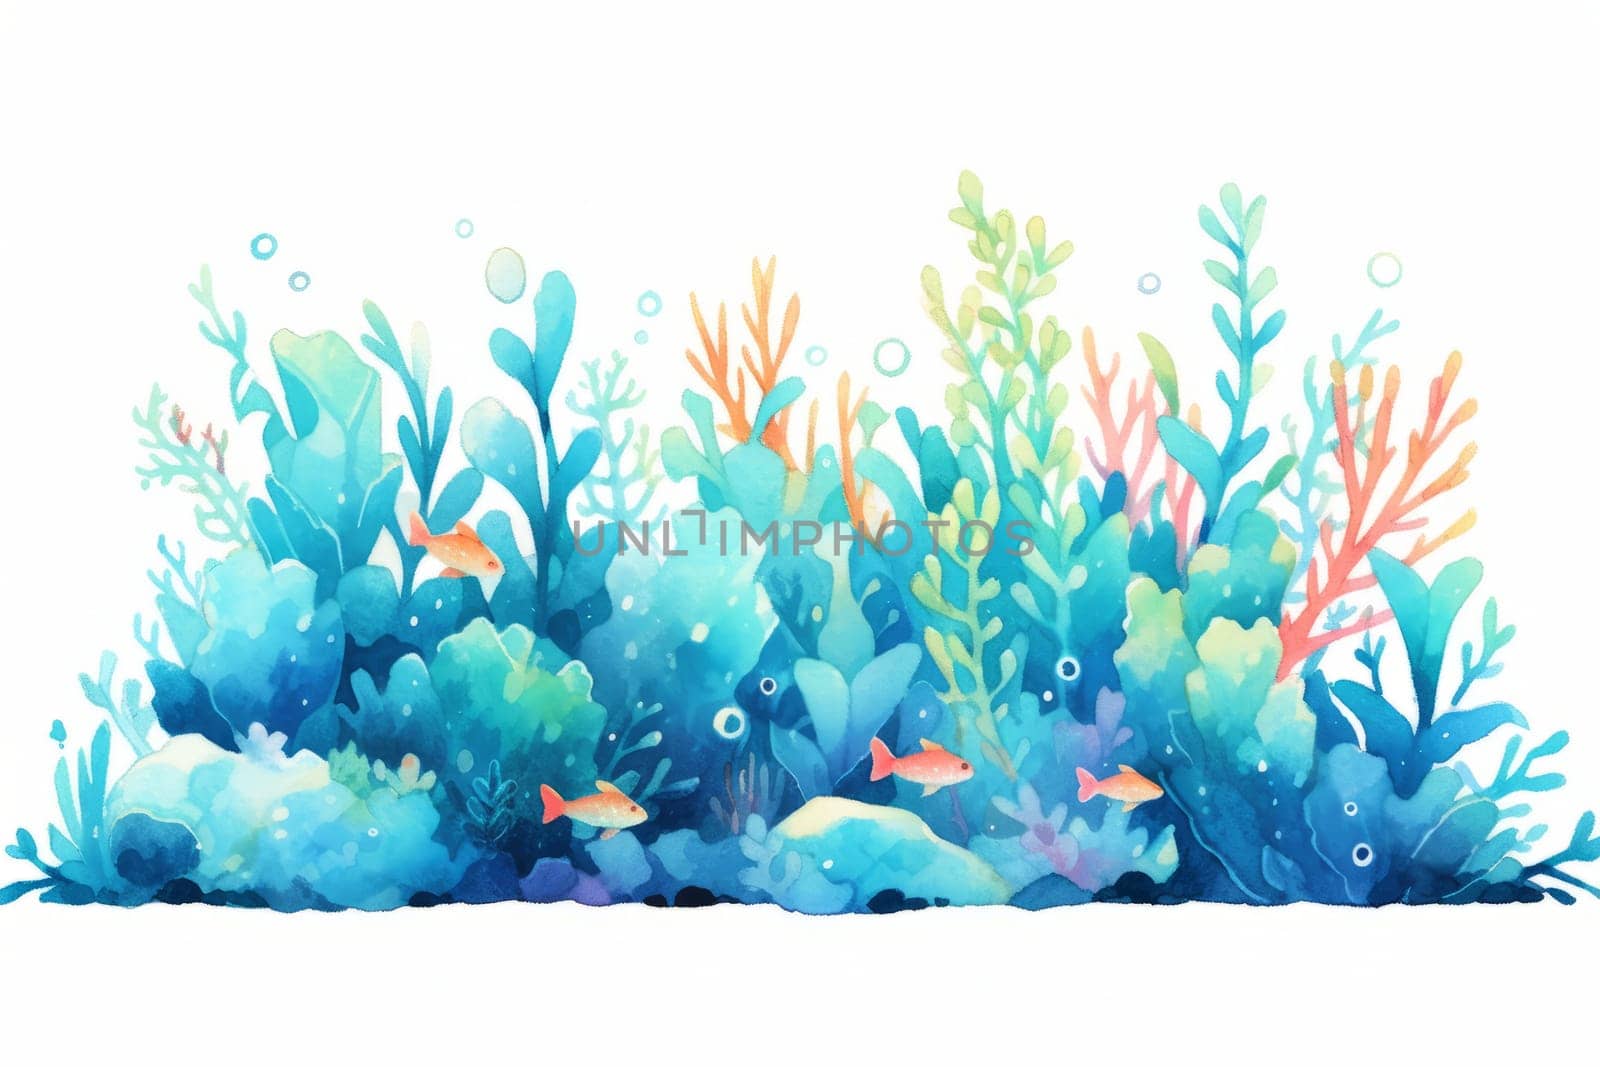 Seaweed on a seabed landscape hand painted watercolor illustration. by Artsiom